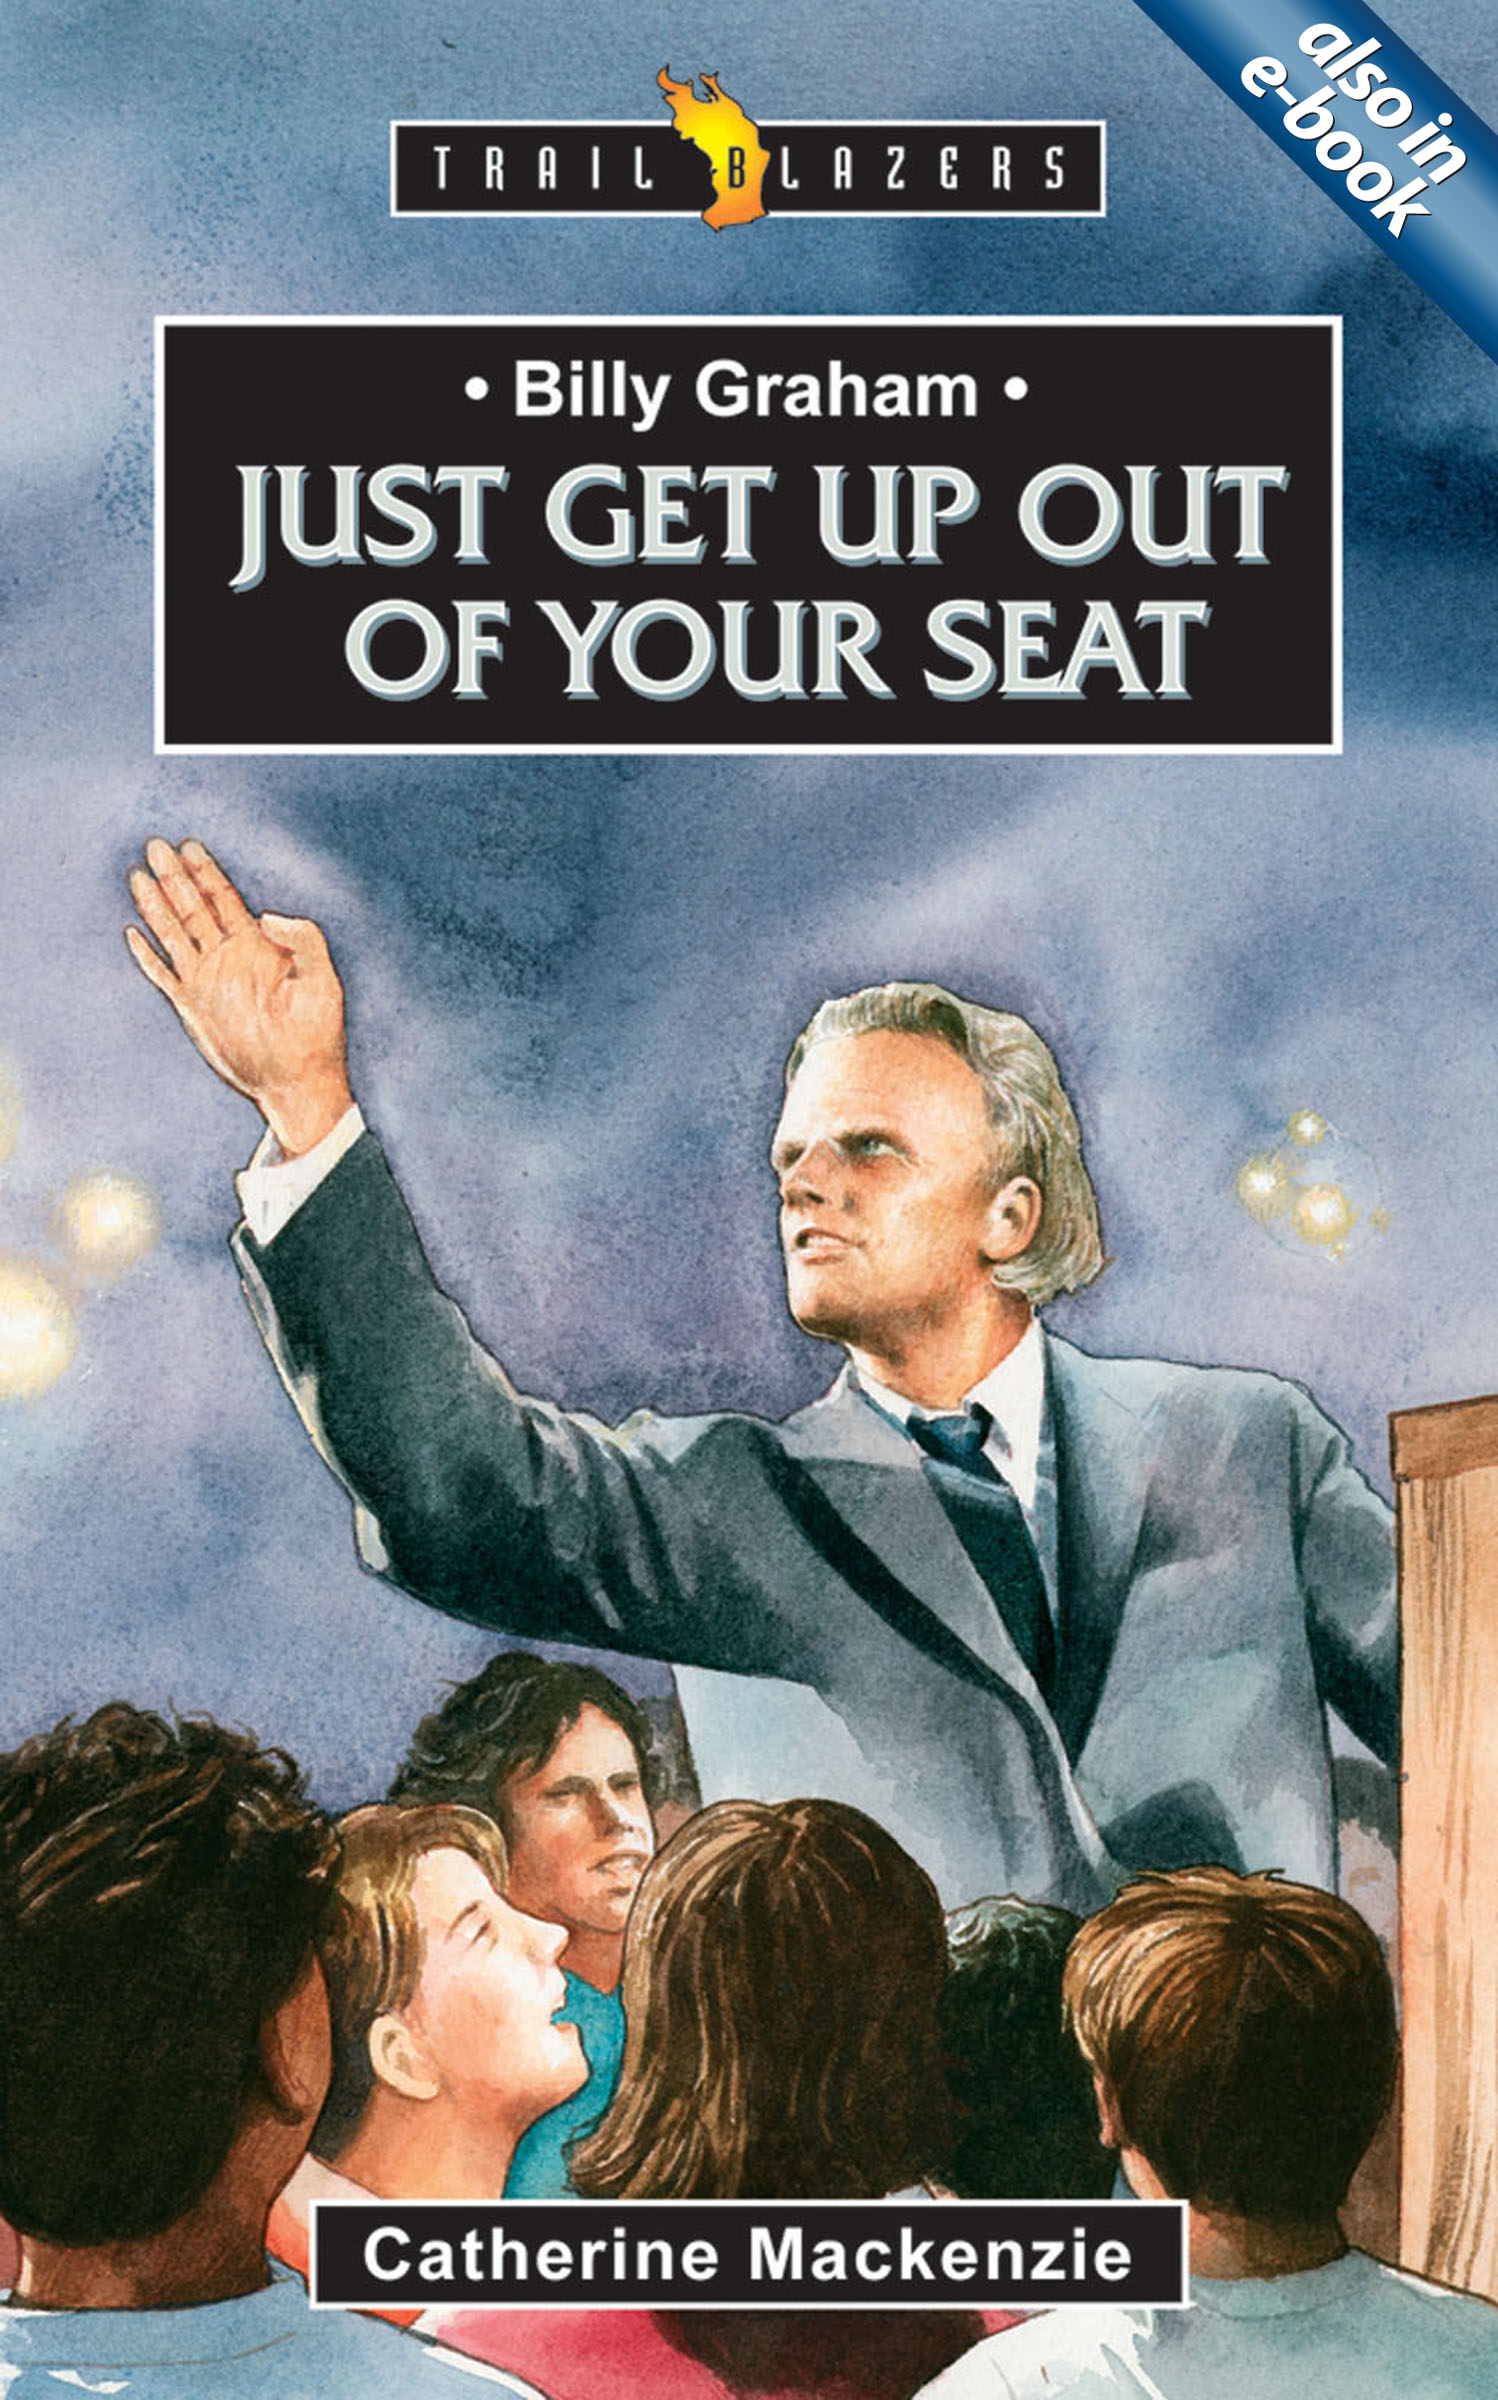 BILLY GRAHAM JUST GET UP OUT OF YOUR SEAT